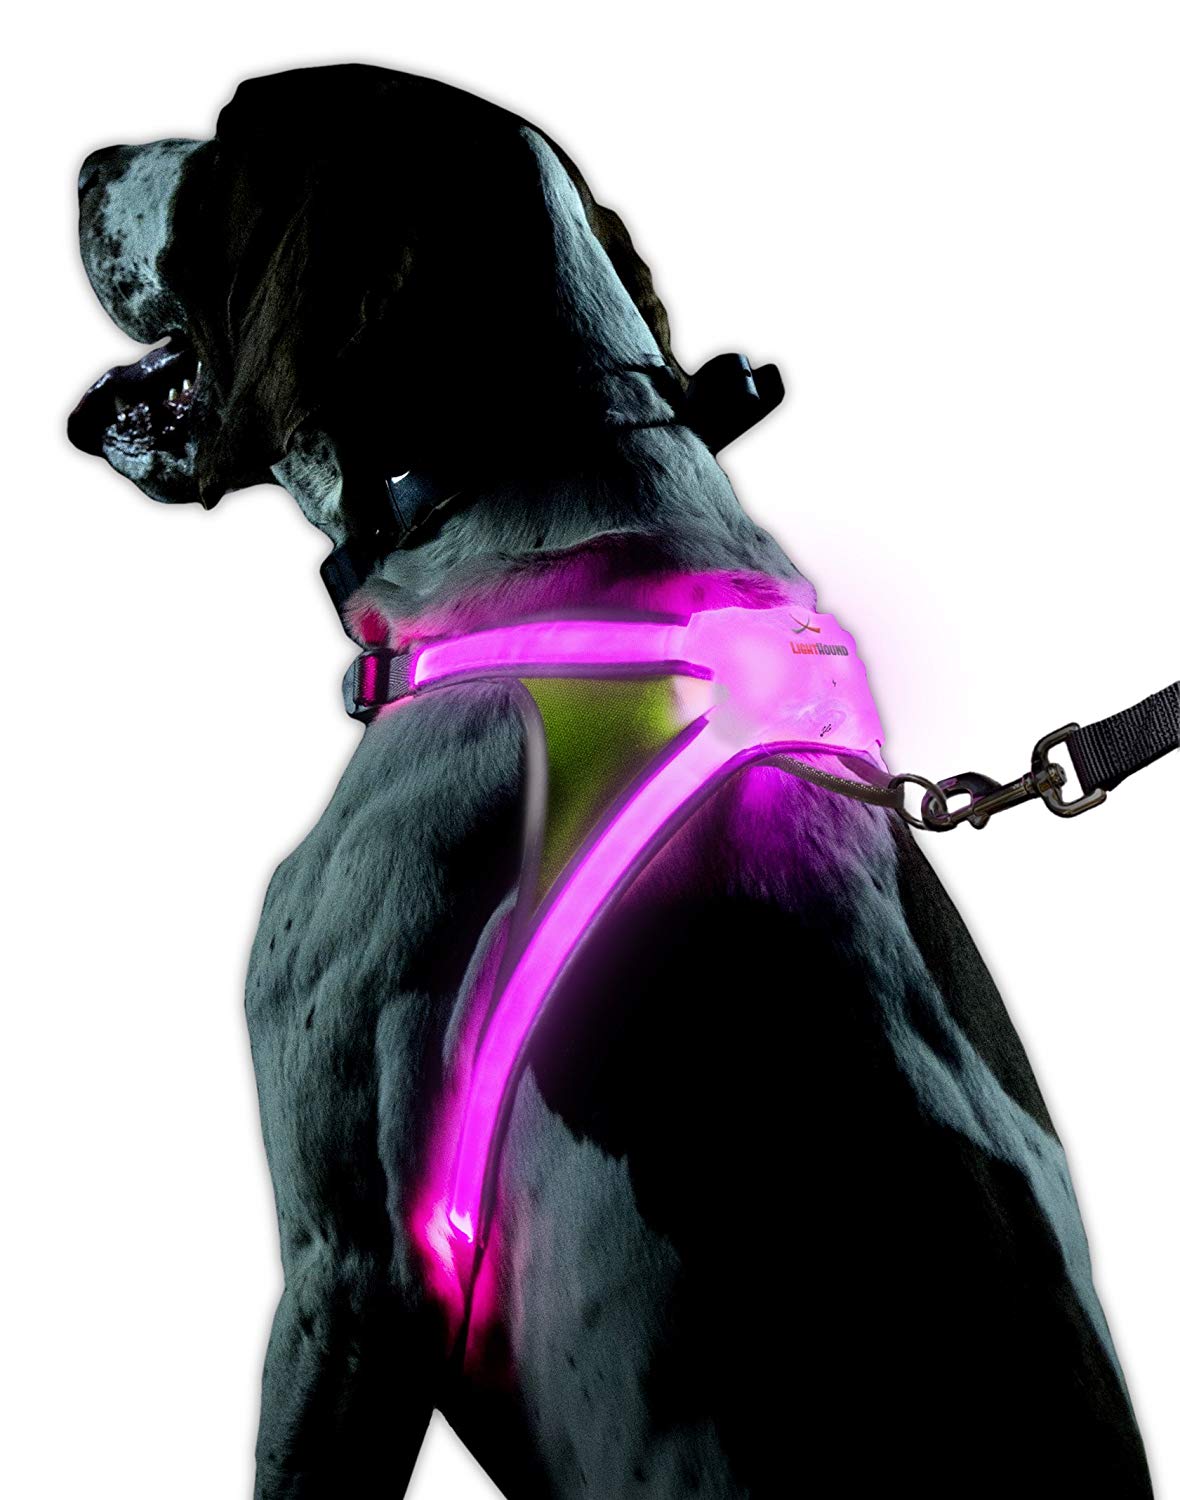 noxgear LightHound – Revolutionary Illuminated and Reflective Harness for Dogs Including Multicolored LED Fiber Optics (USB Rechargeable, Adjustable, 2